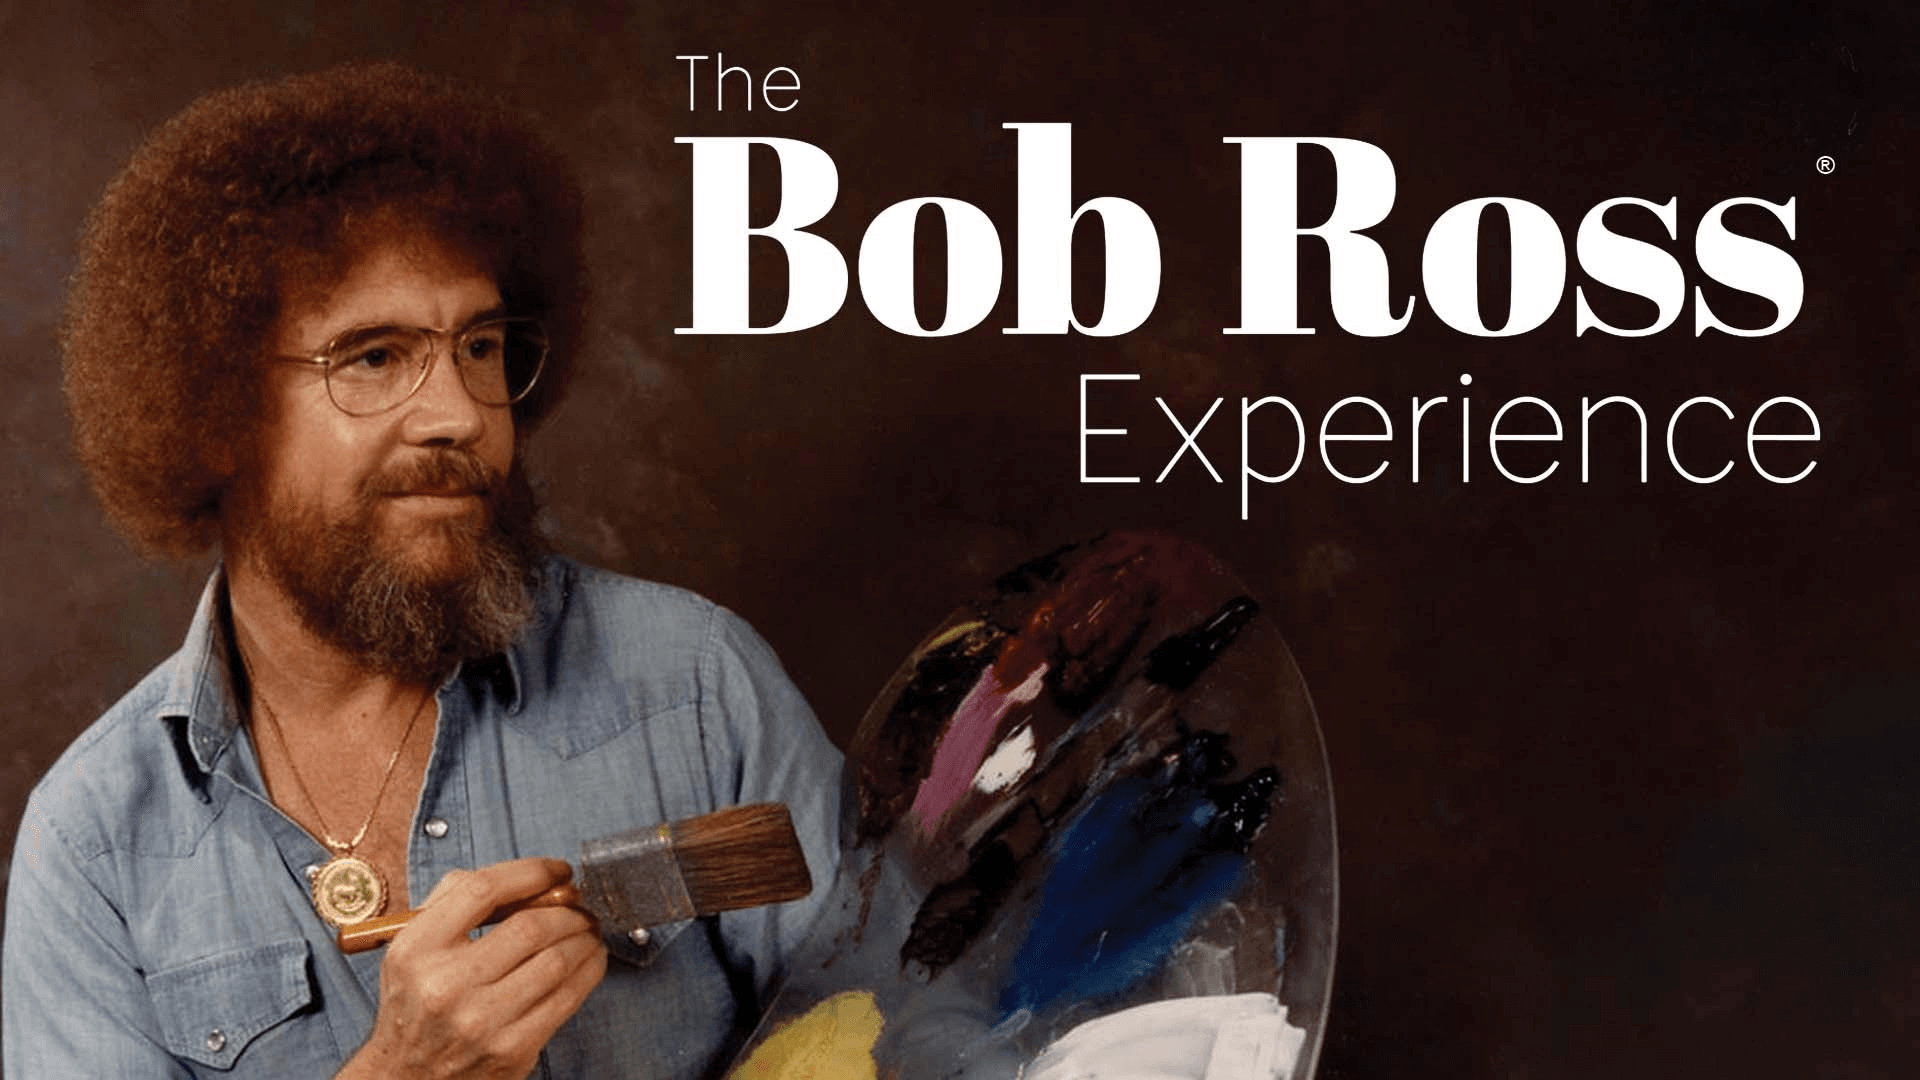 Bob Ross Mastered the Art of Personal Style